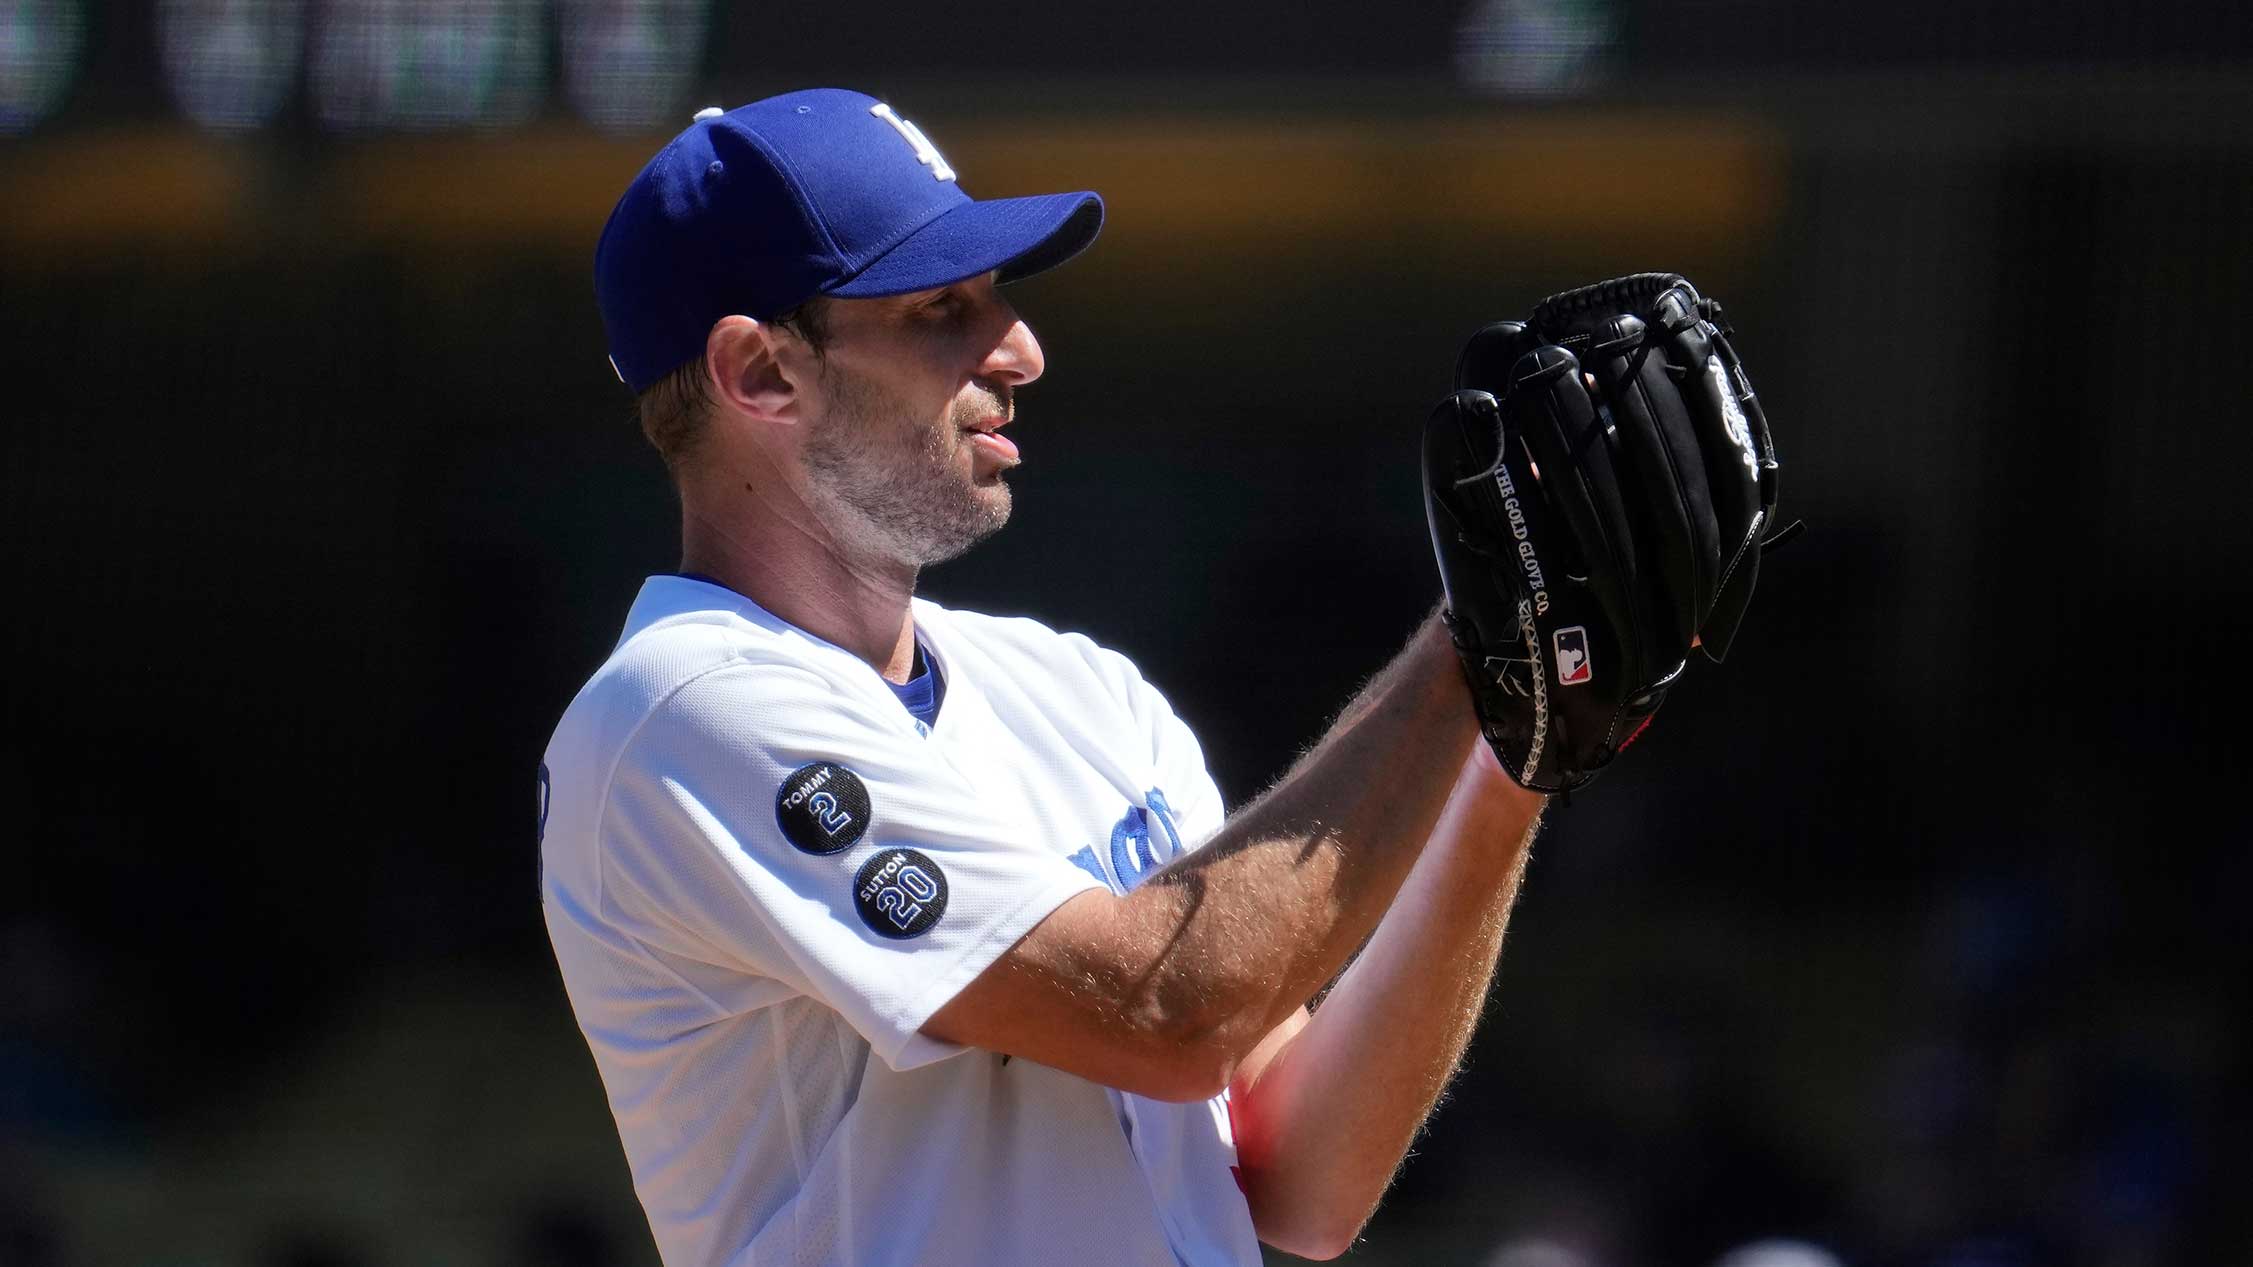 BREAKING NEWS: Max Scherzer and the New York Mets agree to a 3